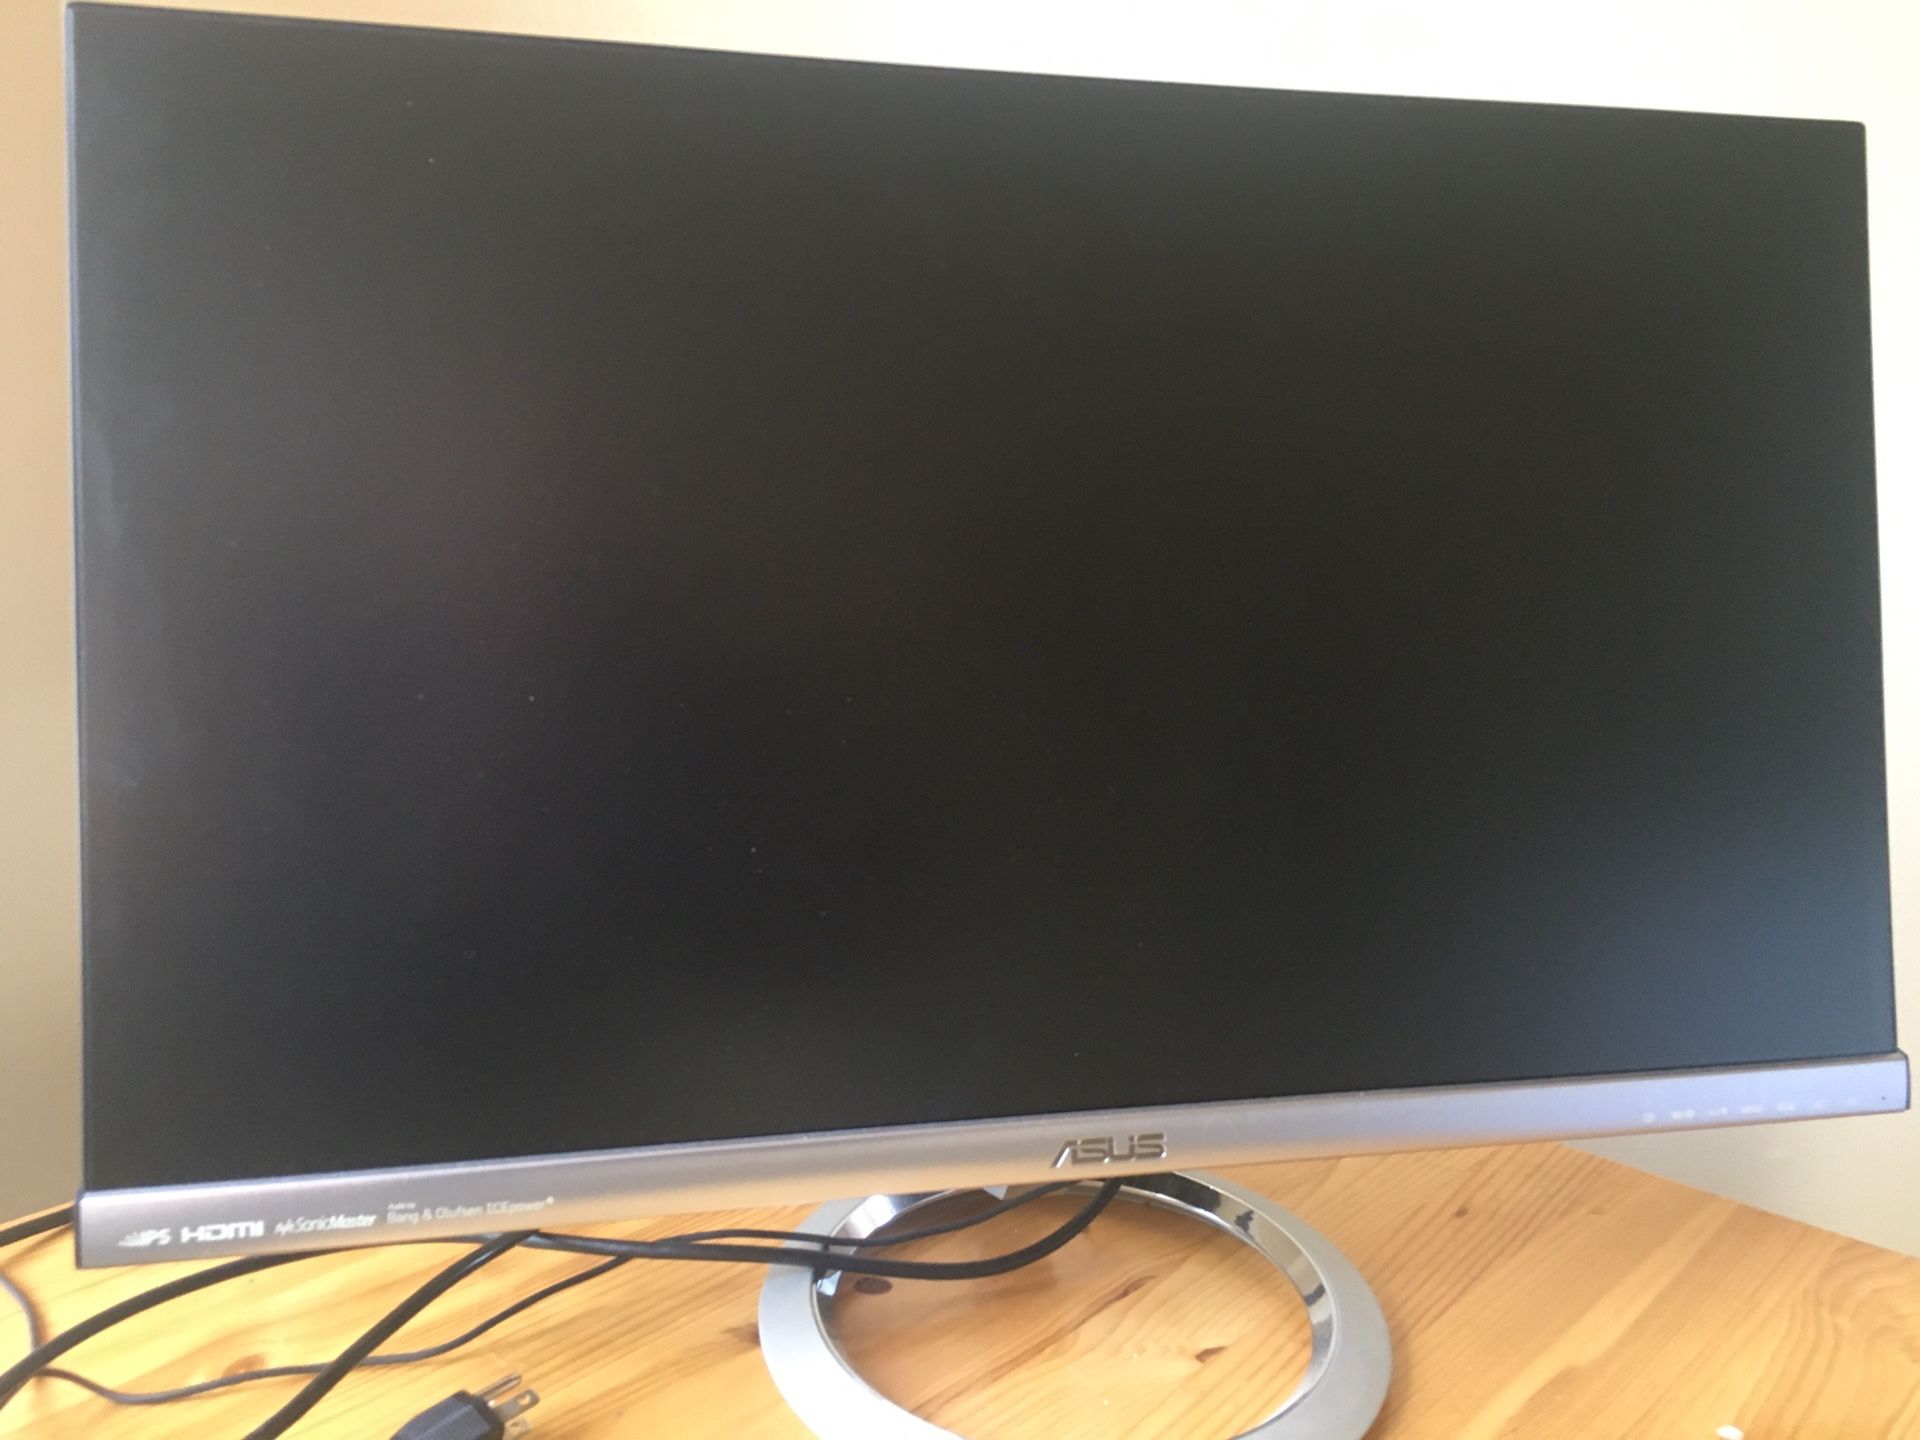 27” LED Monitor w/built in speakers - Asus MX279H